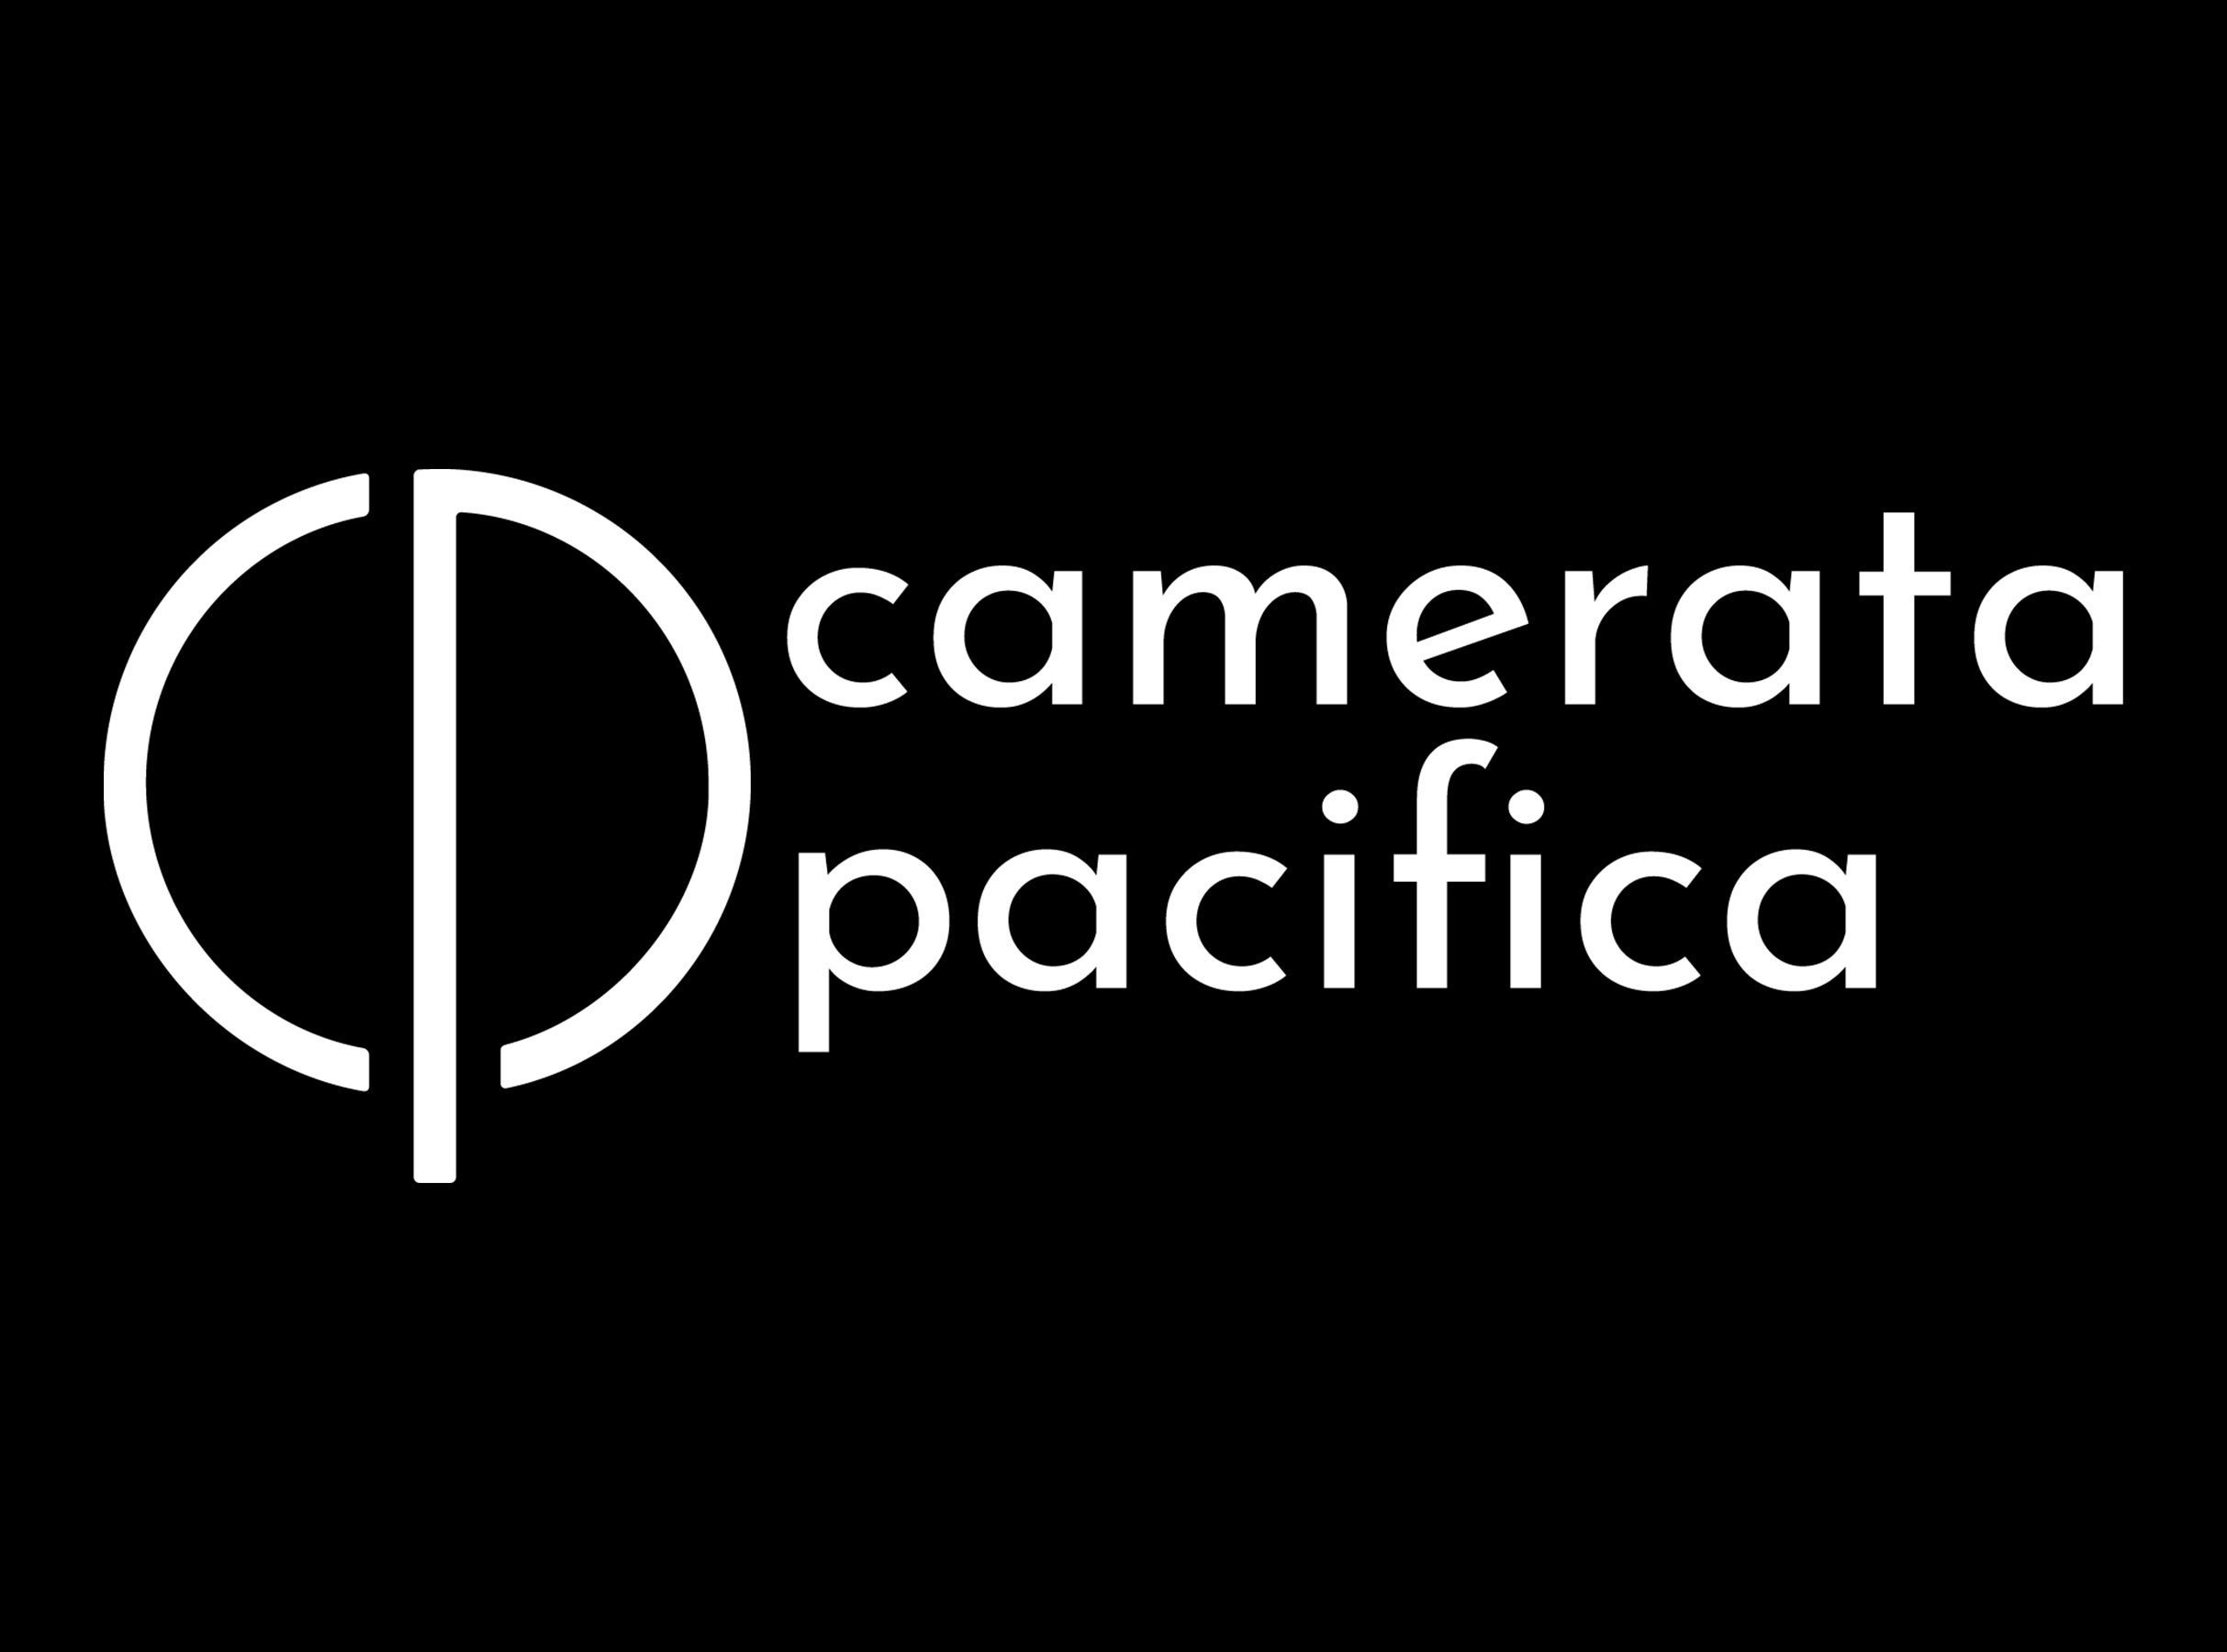 Main image for event titled Camerata Pacifica